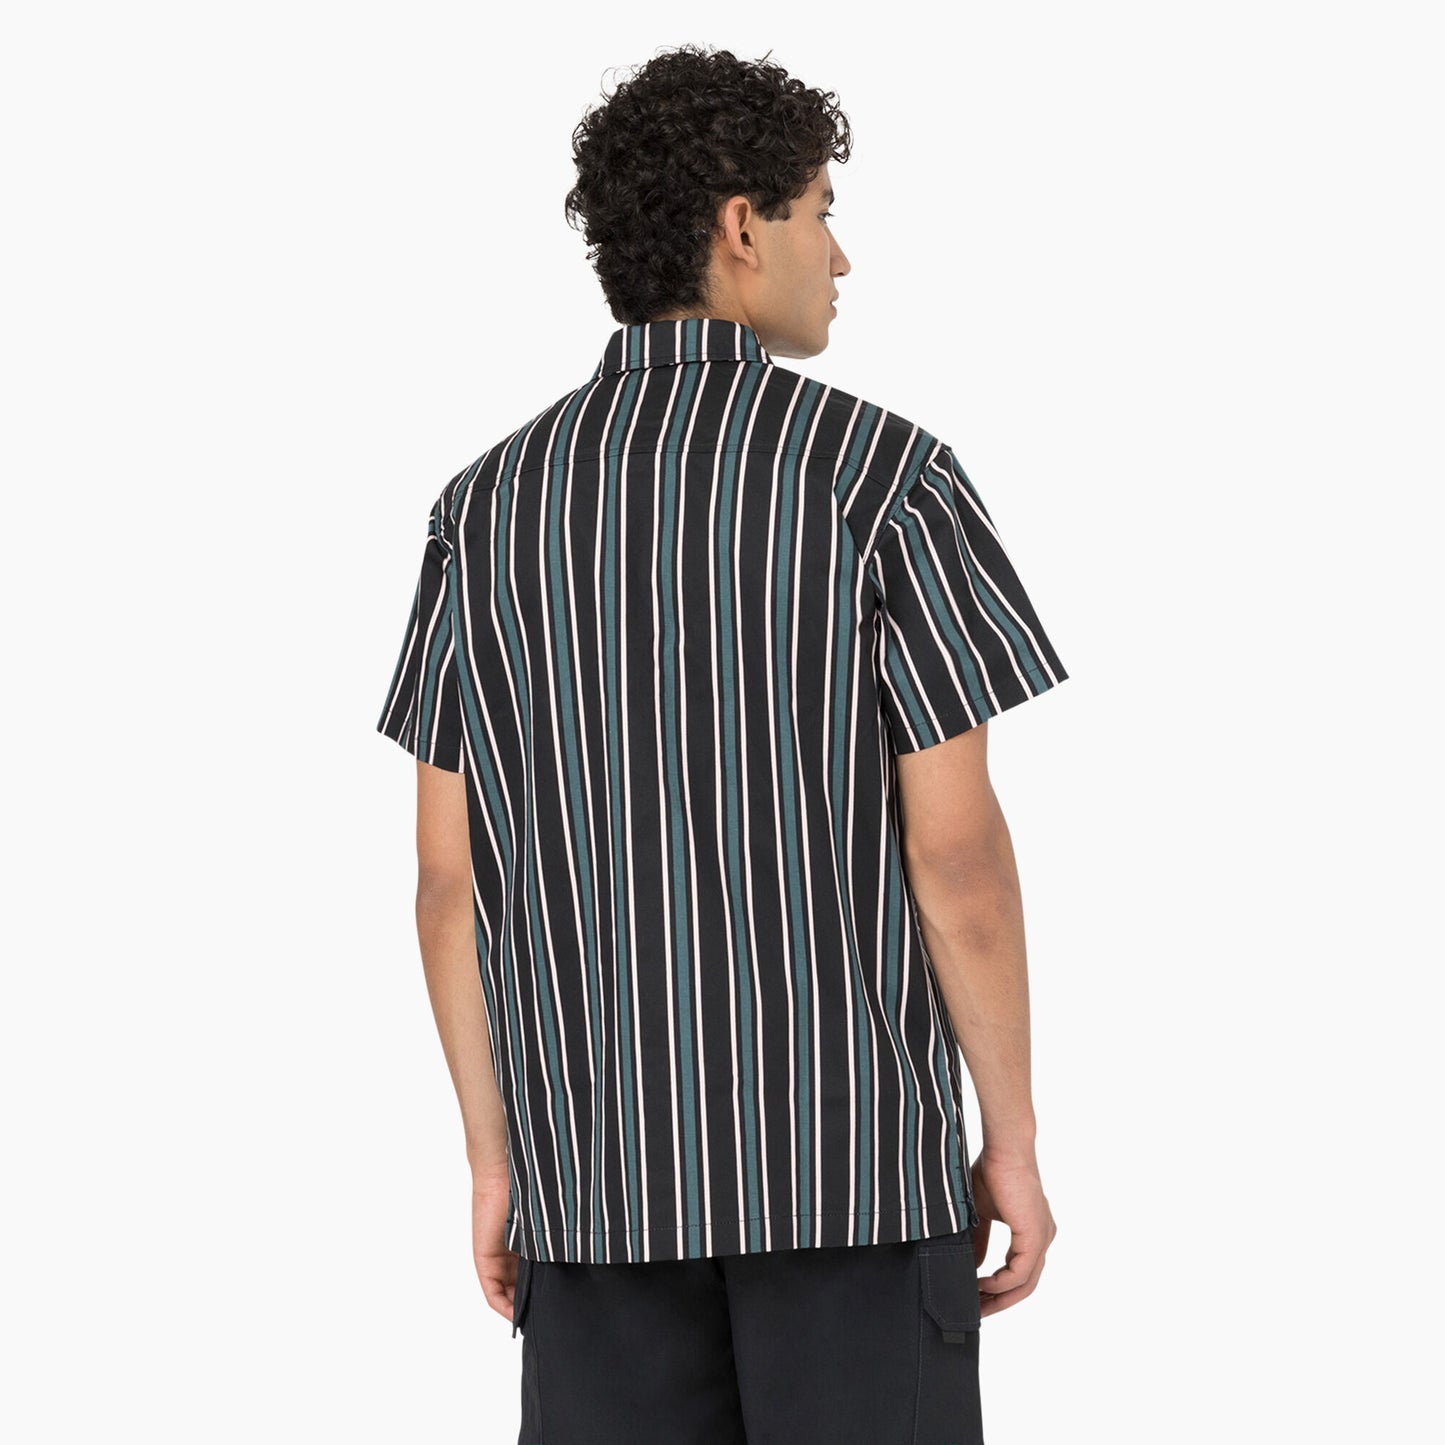 Dickies Skateboarding Lincoln Green/Black Stripe Cooling Relaxed Fit Button Up Shirt